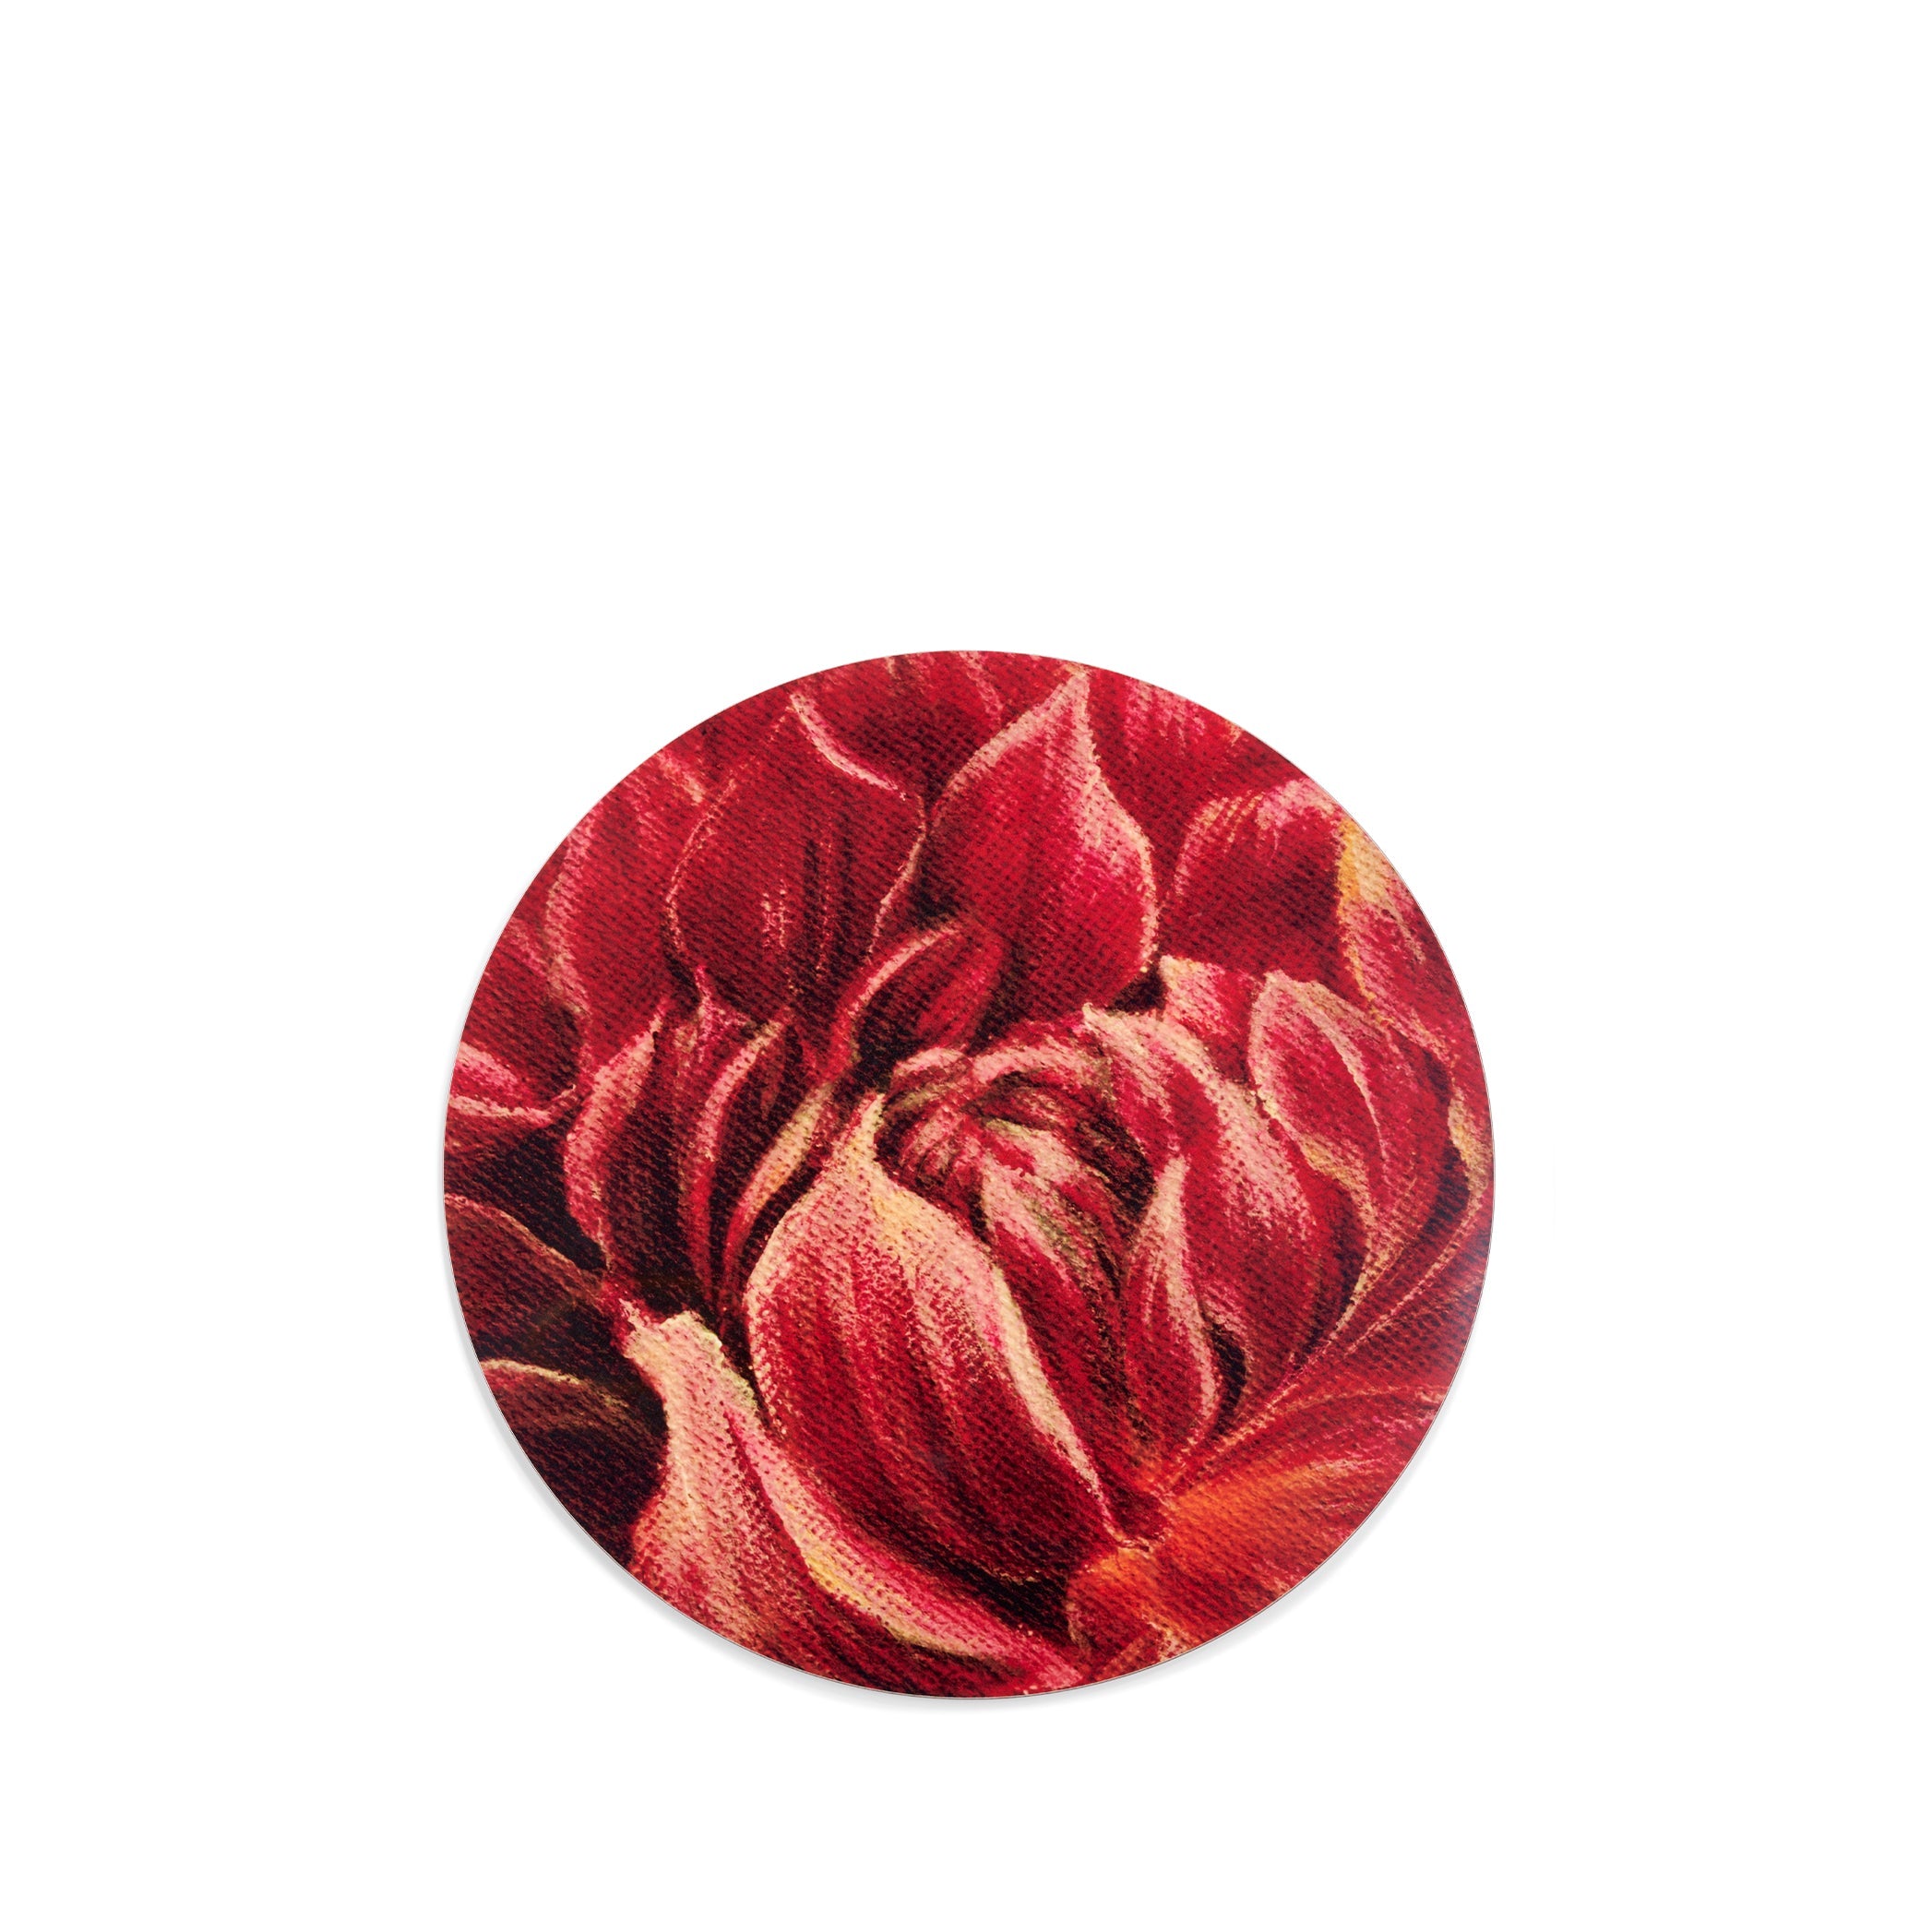 Dahlia 'Surprise' Round Cork-Backed Placemat in Pink